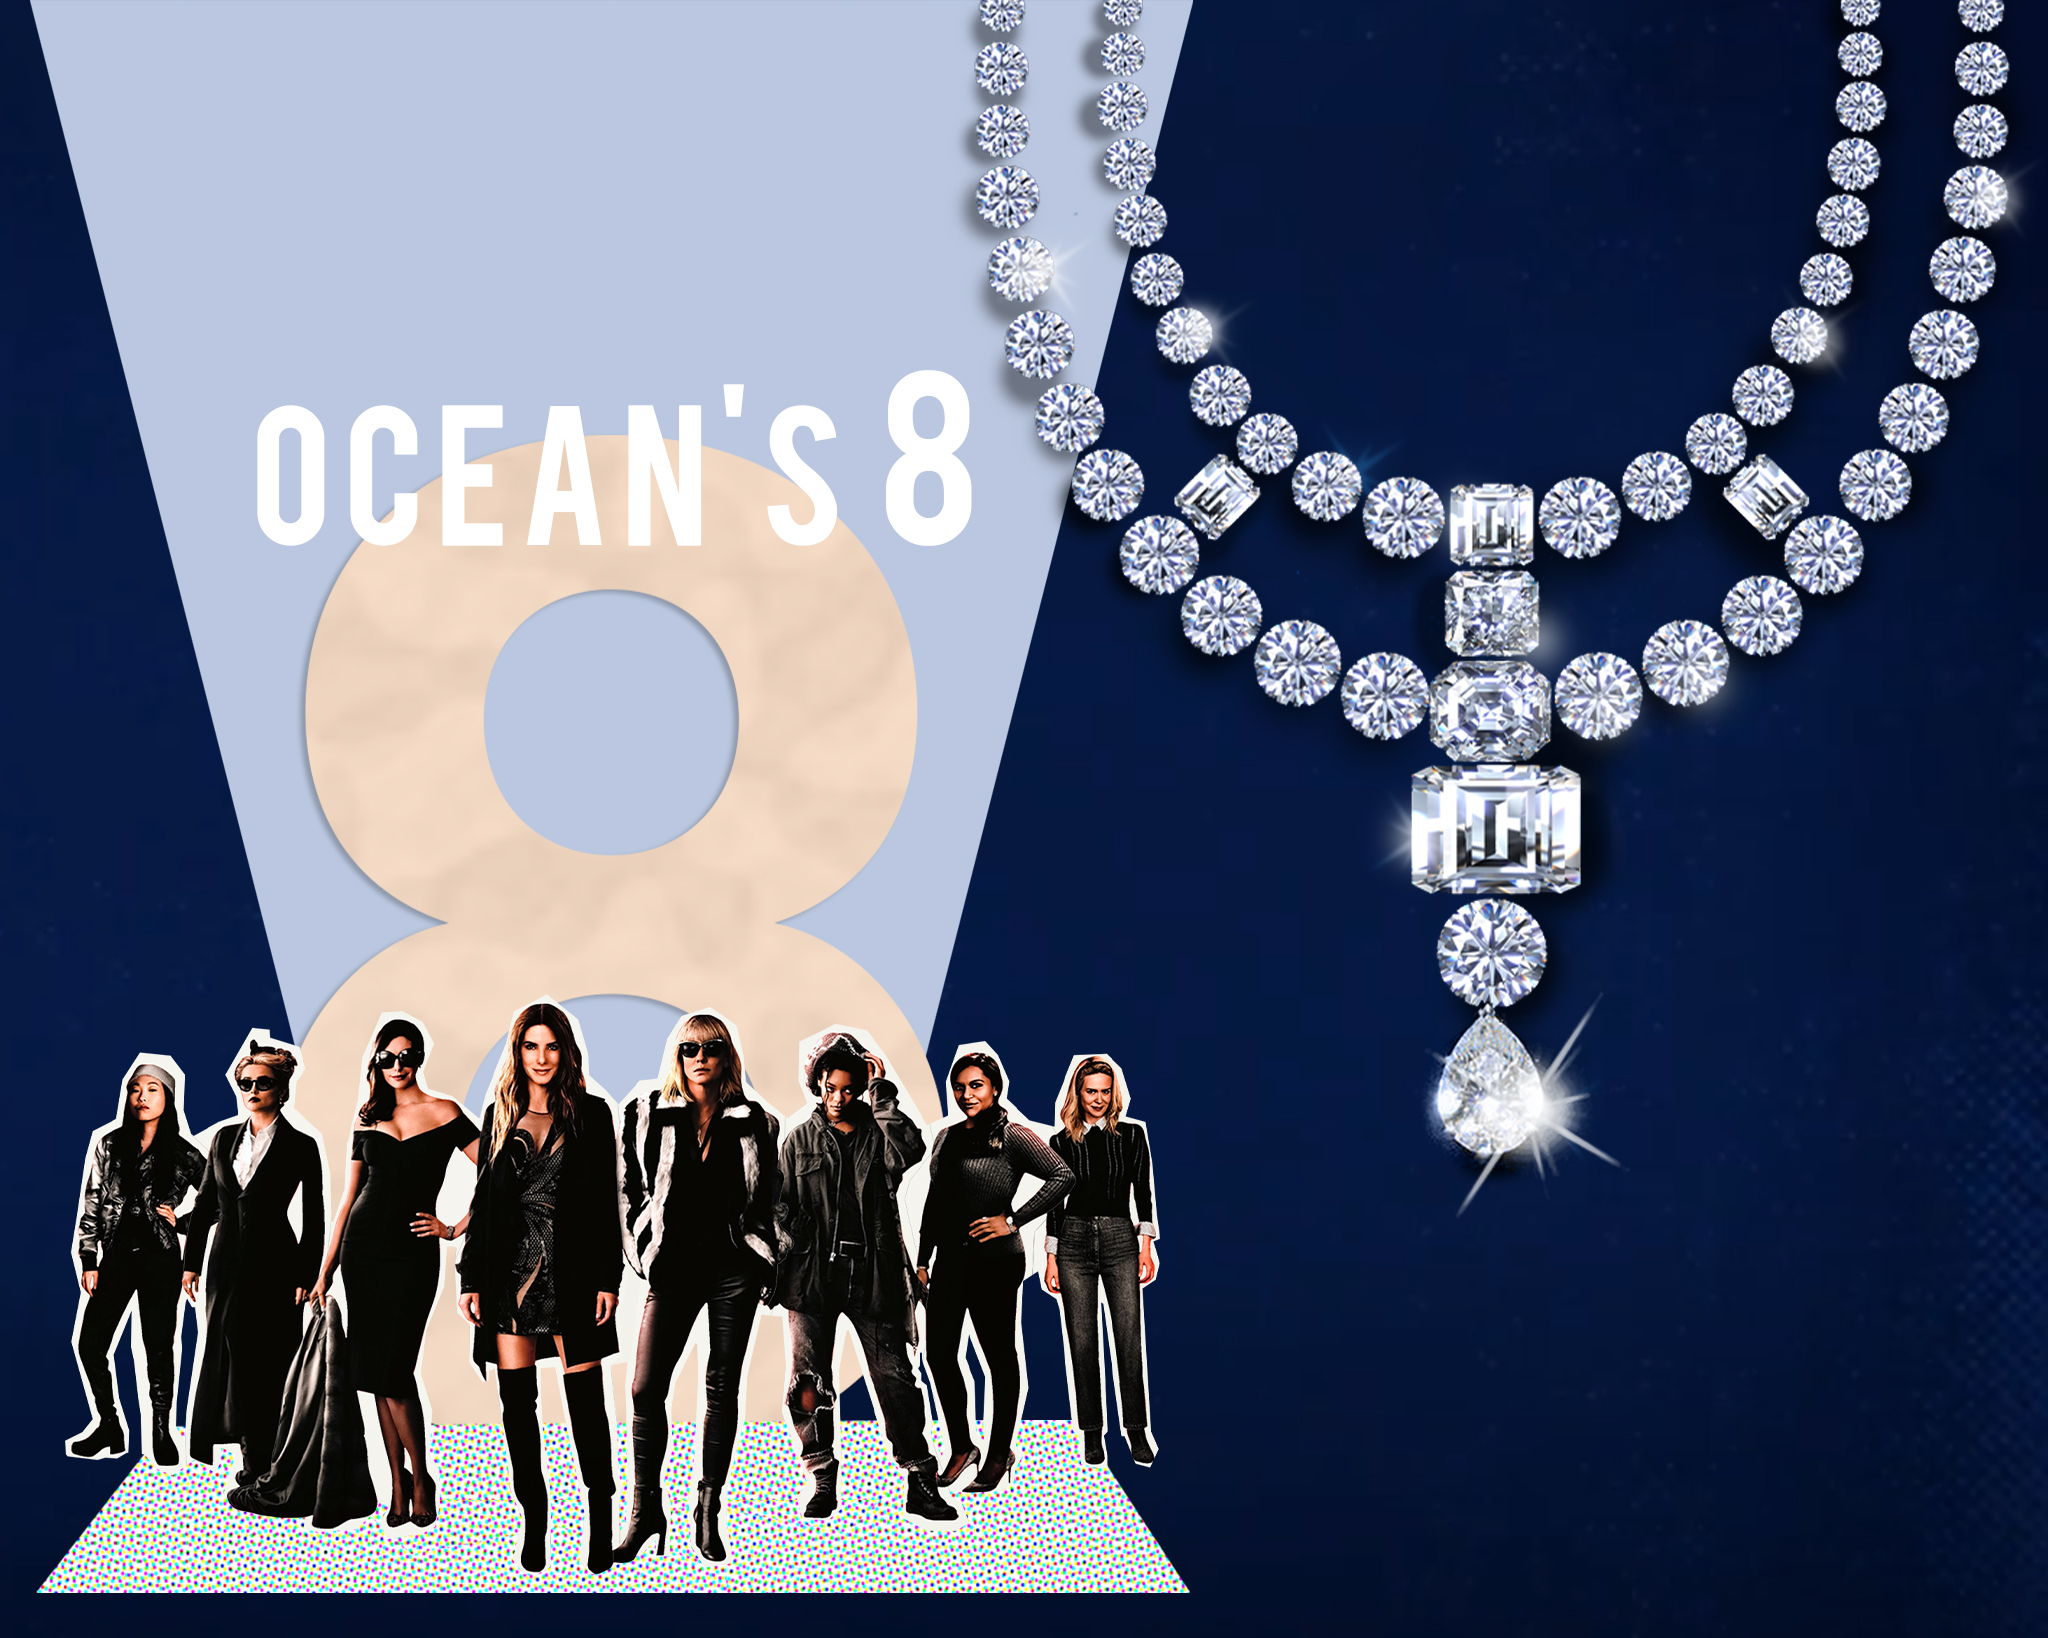 The girl gang in Oceans 8 swindle away the legendary Toussaint necklace from the MET Gala